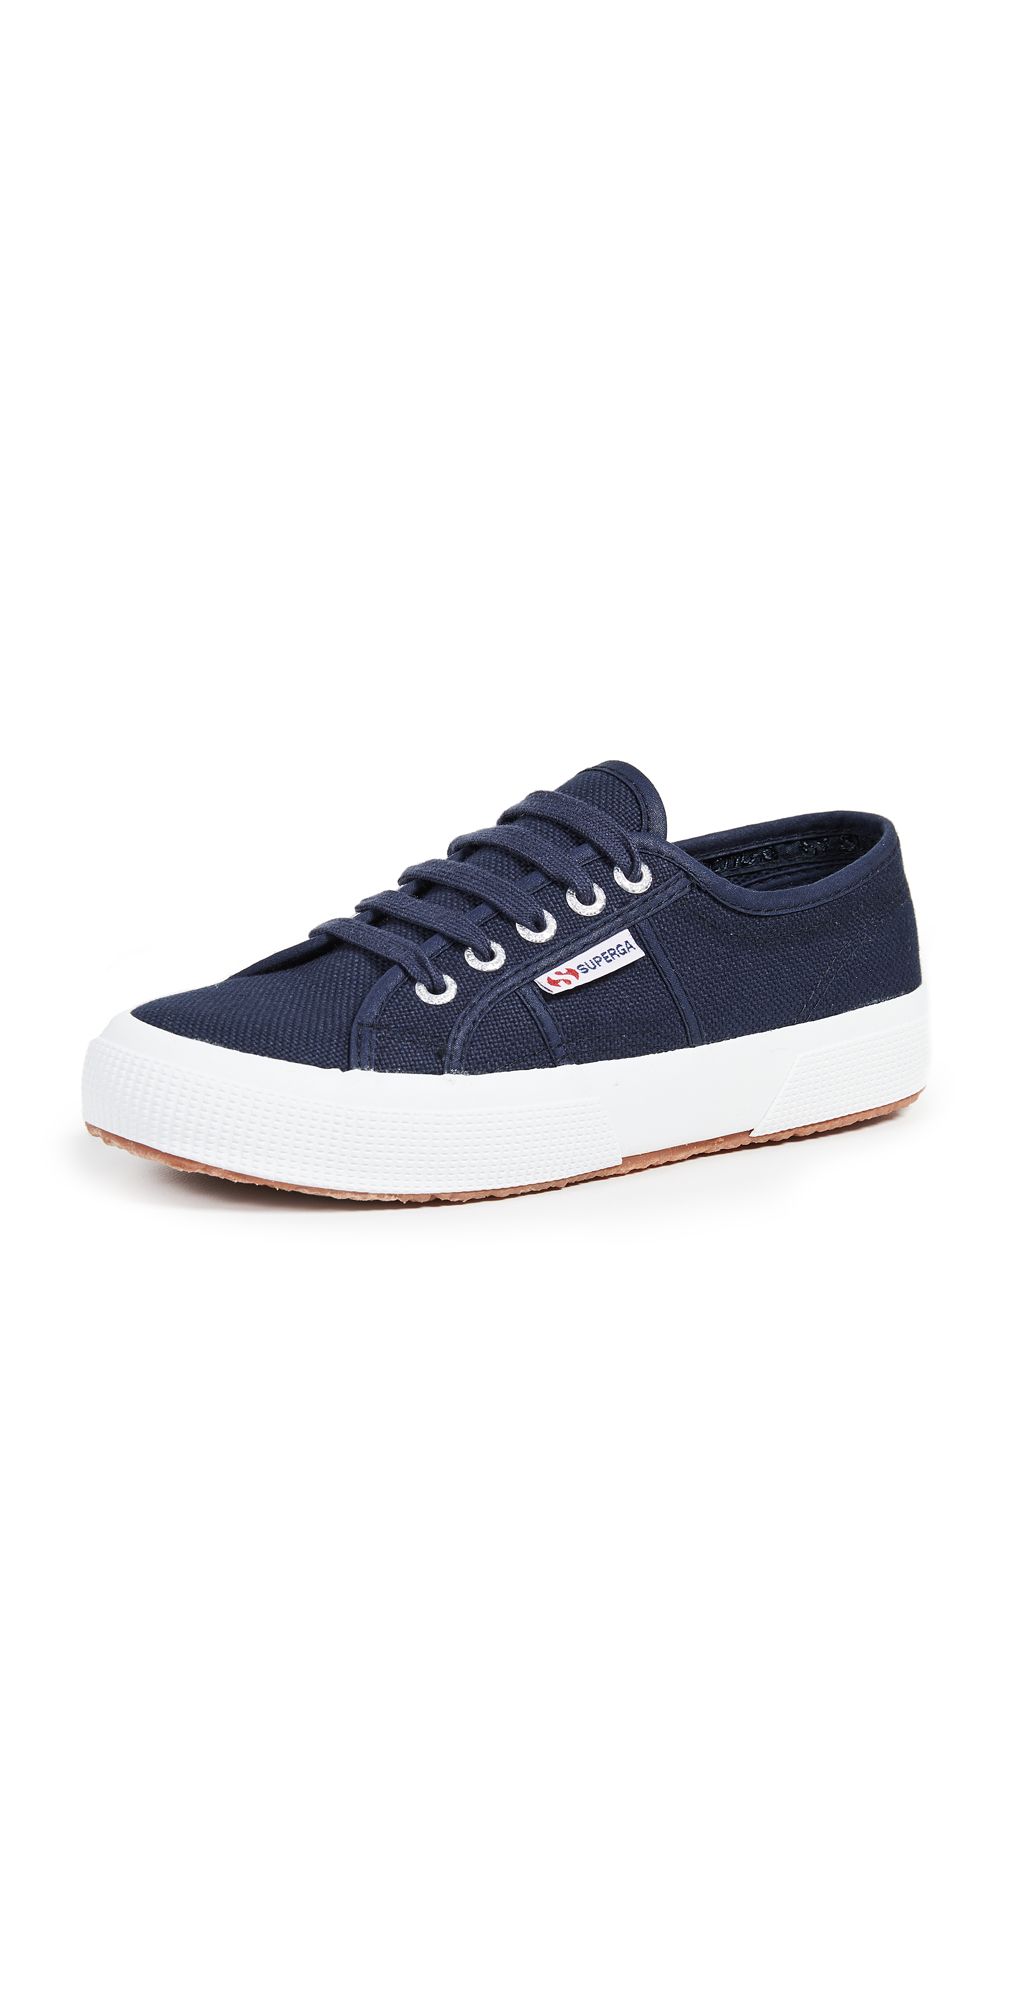 Cotu Classic Lace Up Sneakers | Shopbop